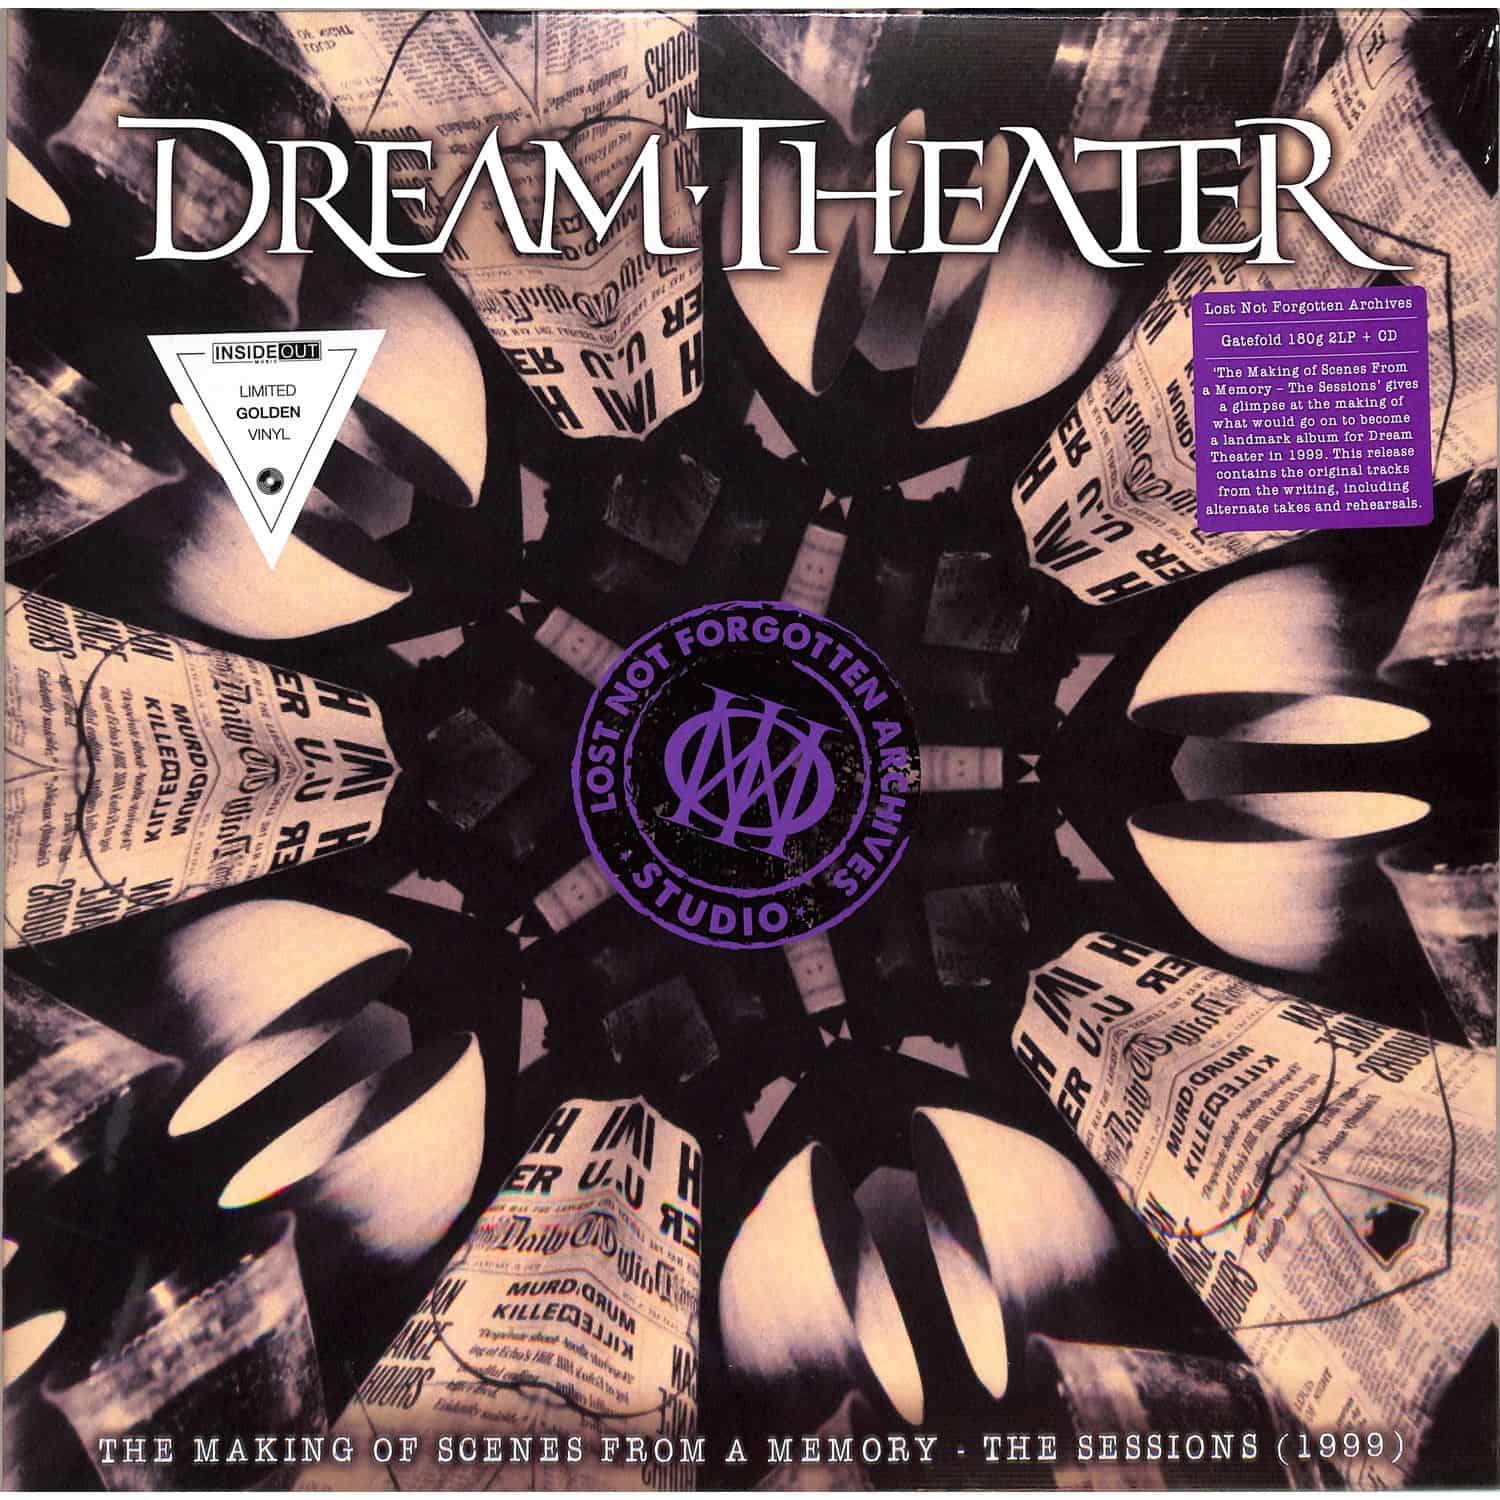 Dream Theater - LOST NOT FORGOTTEN ARCHIVES: THE MAKING OF SCENES